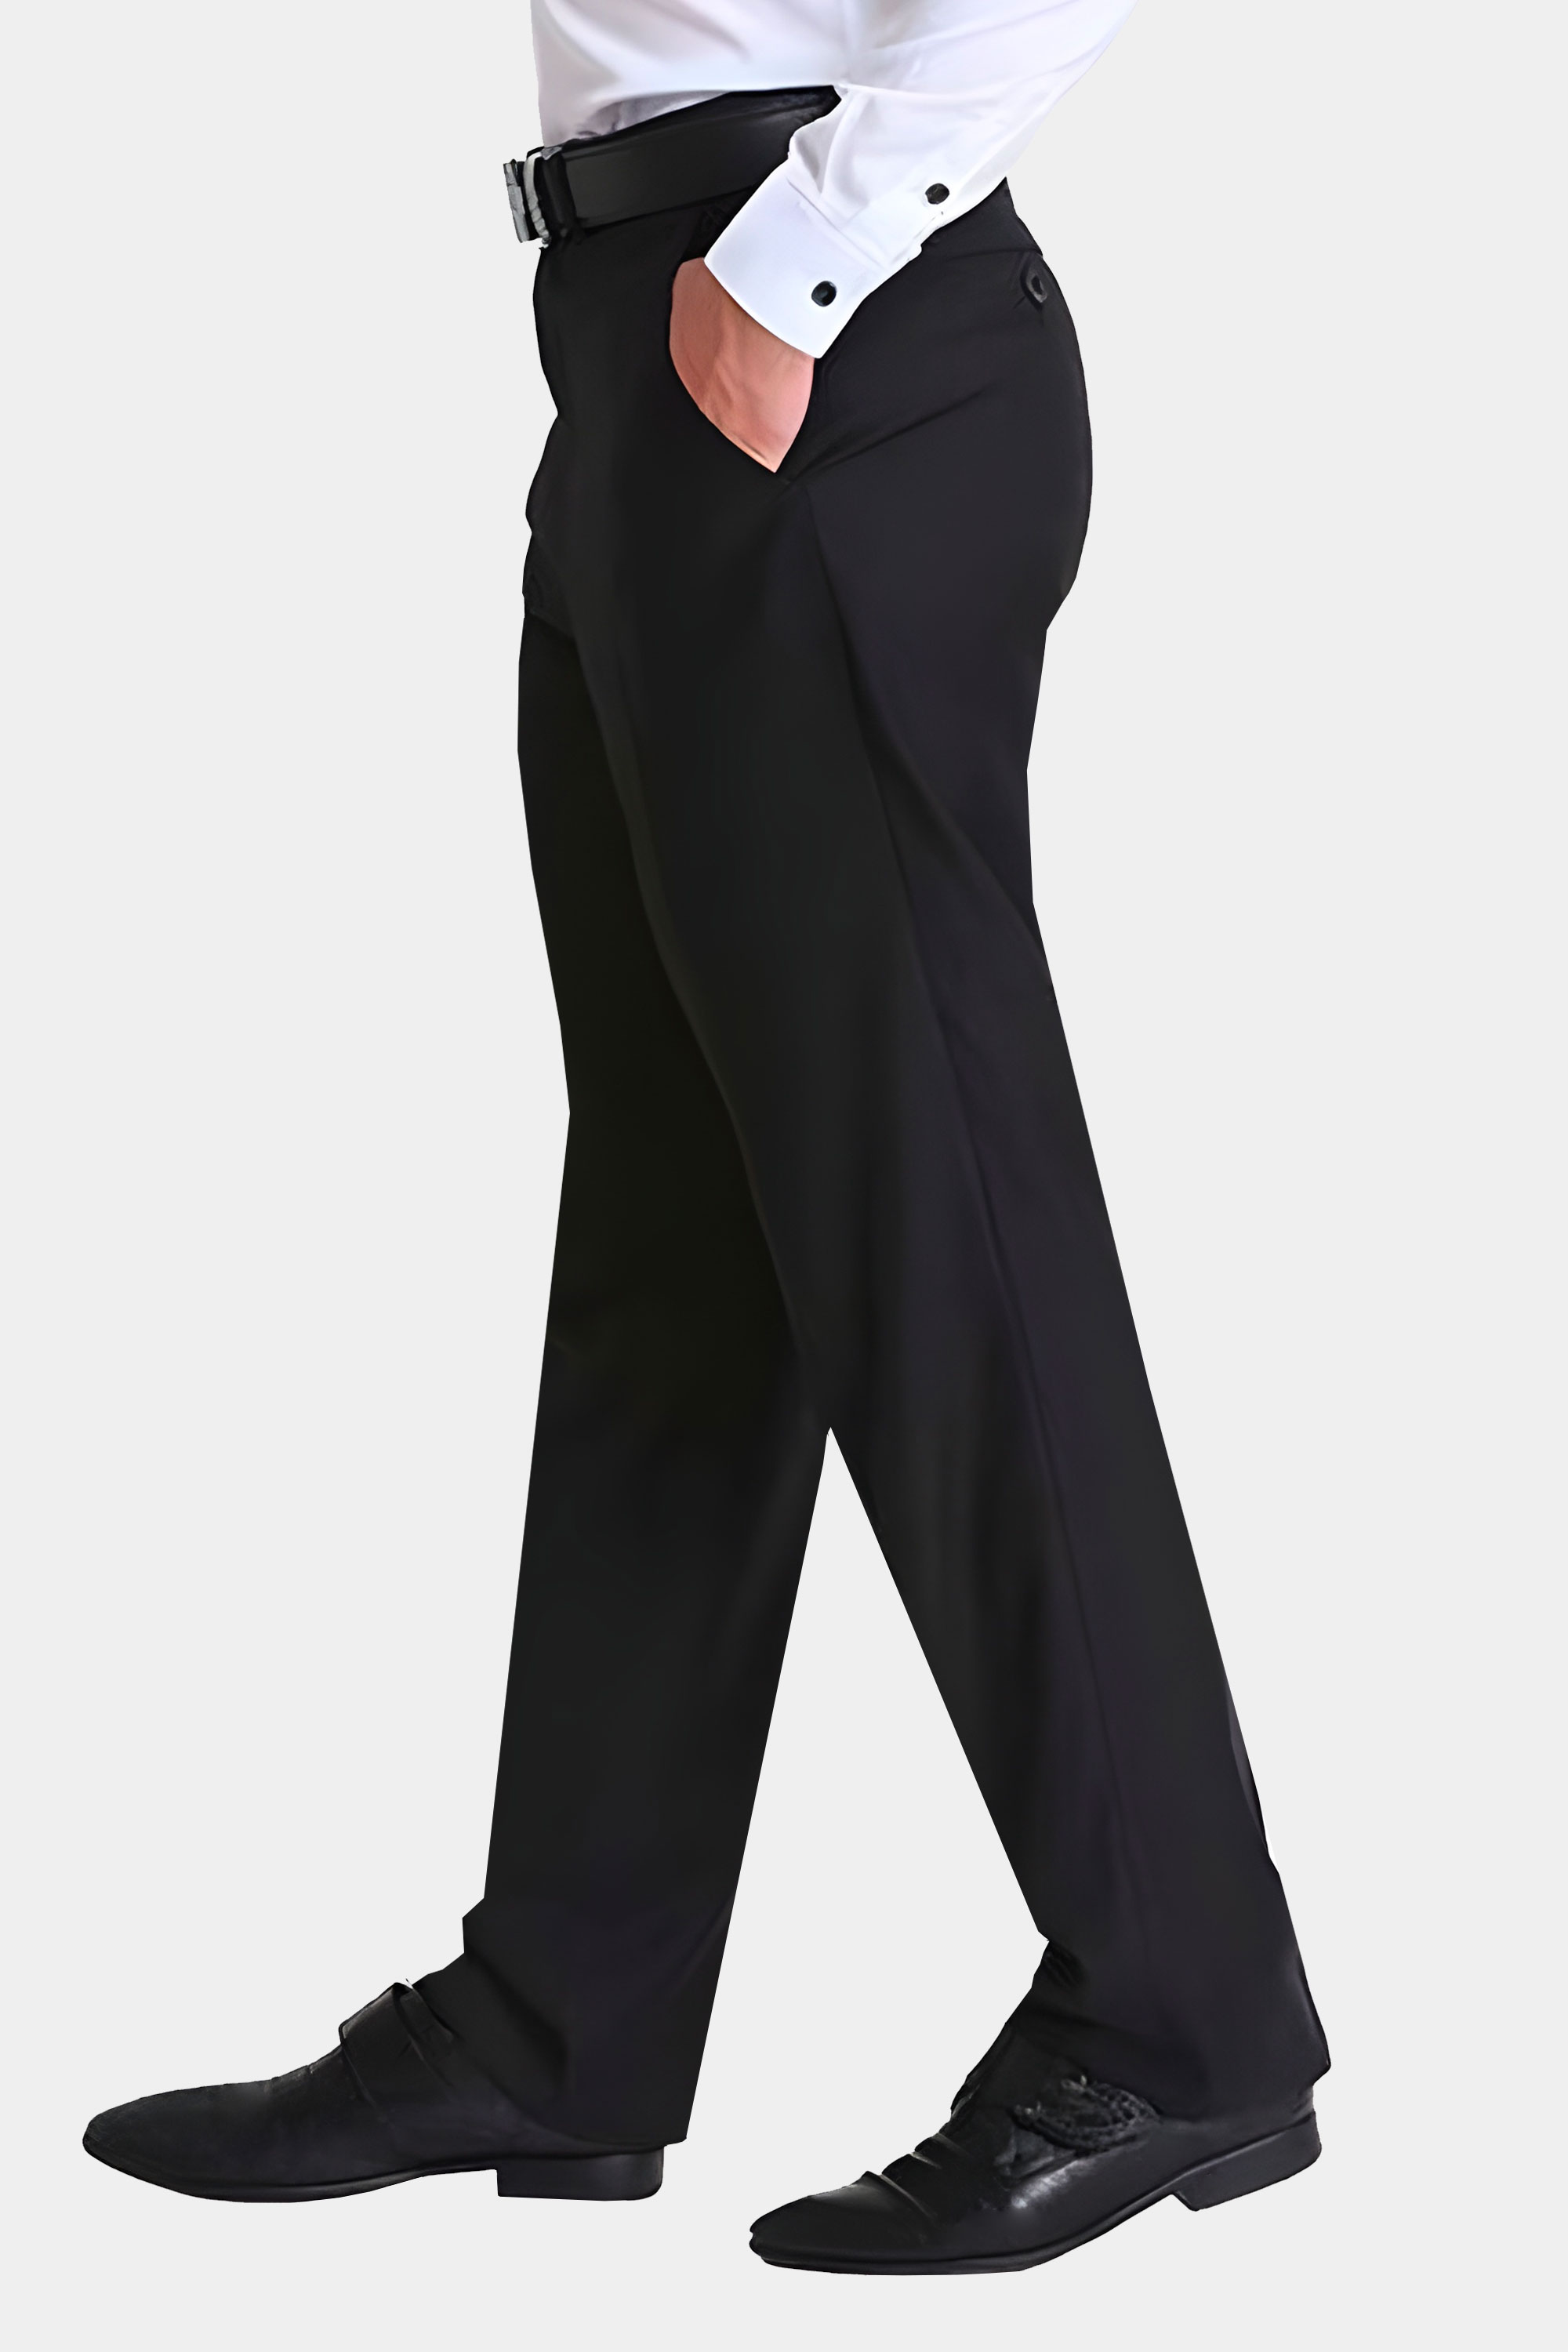 Business Casual with Black Dress Pants